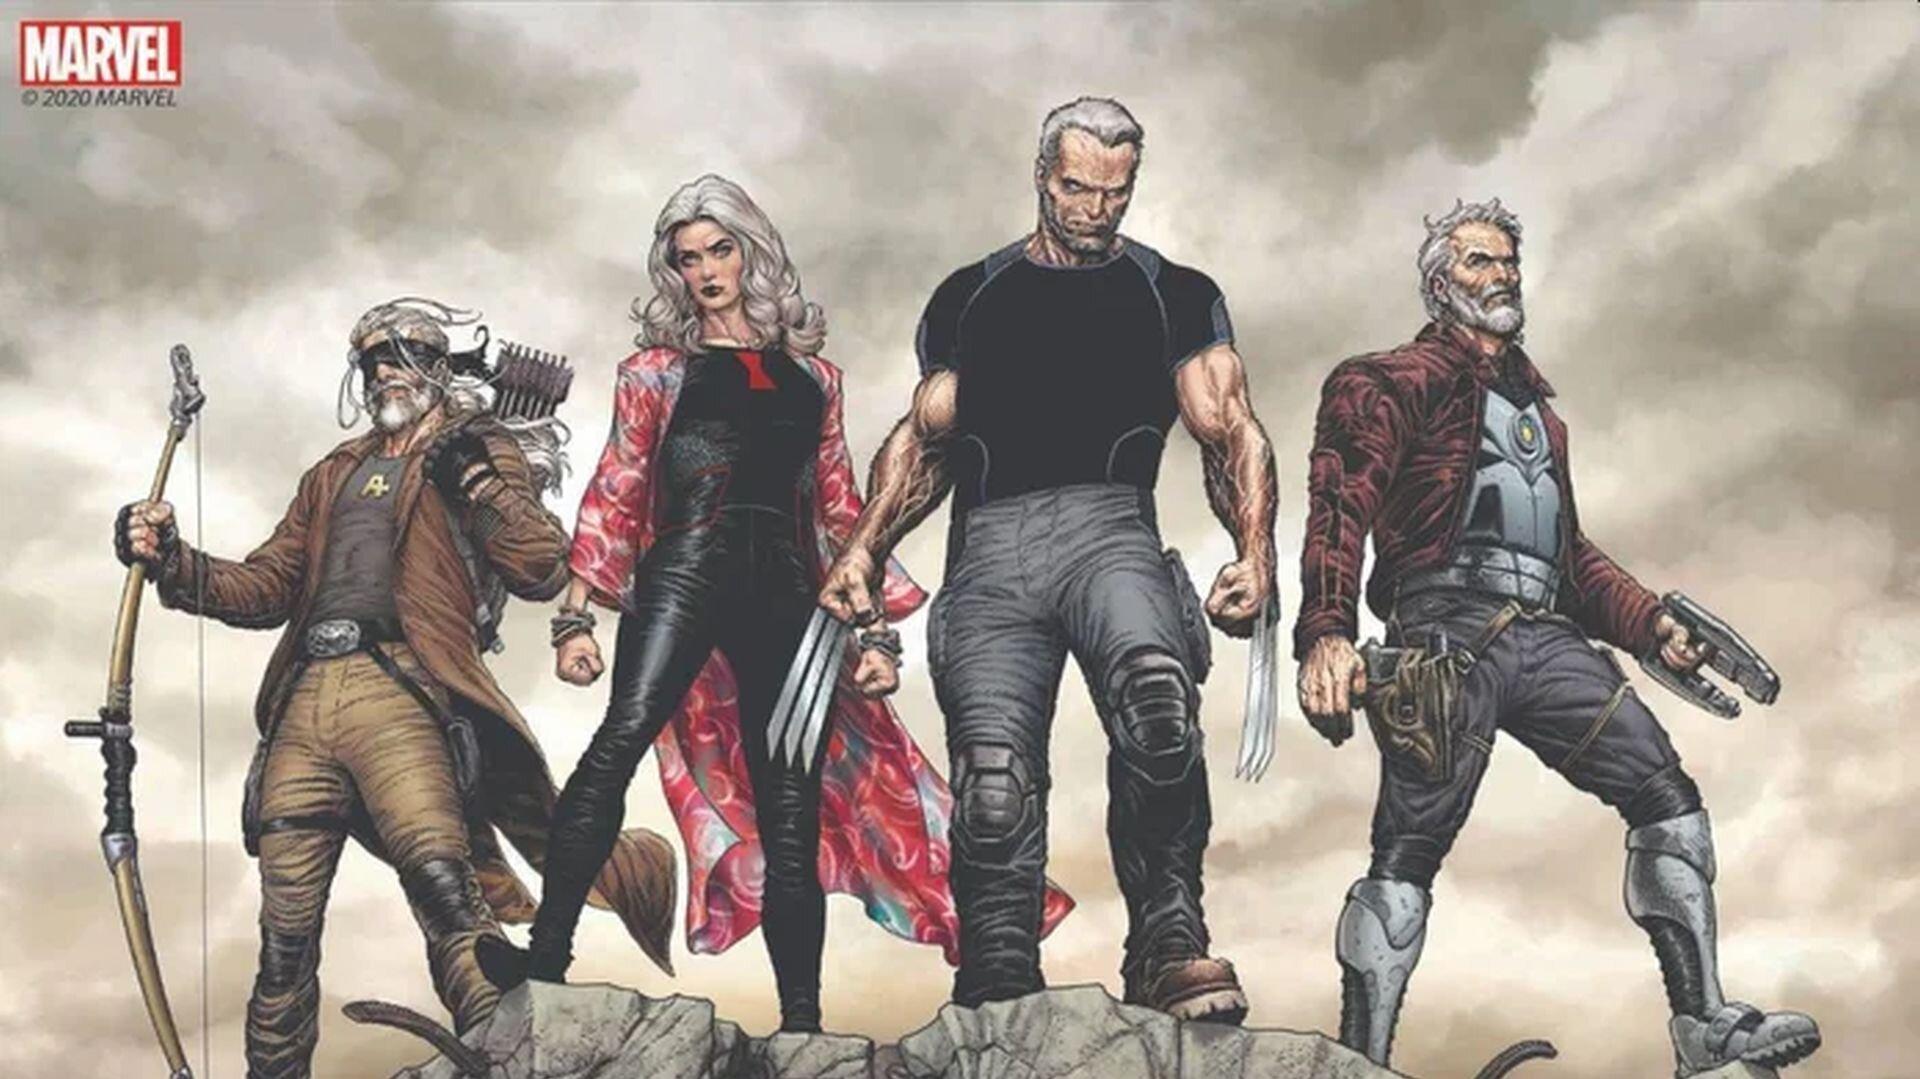 Marvel S Wastelanders Casts Stephen Lang As Clint Barton And Susan